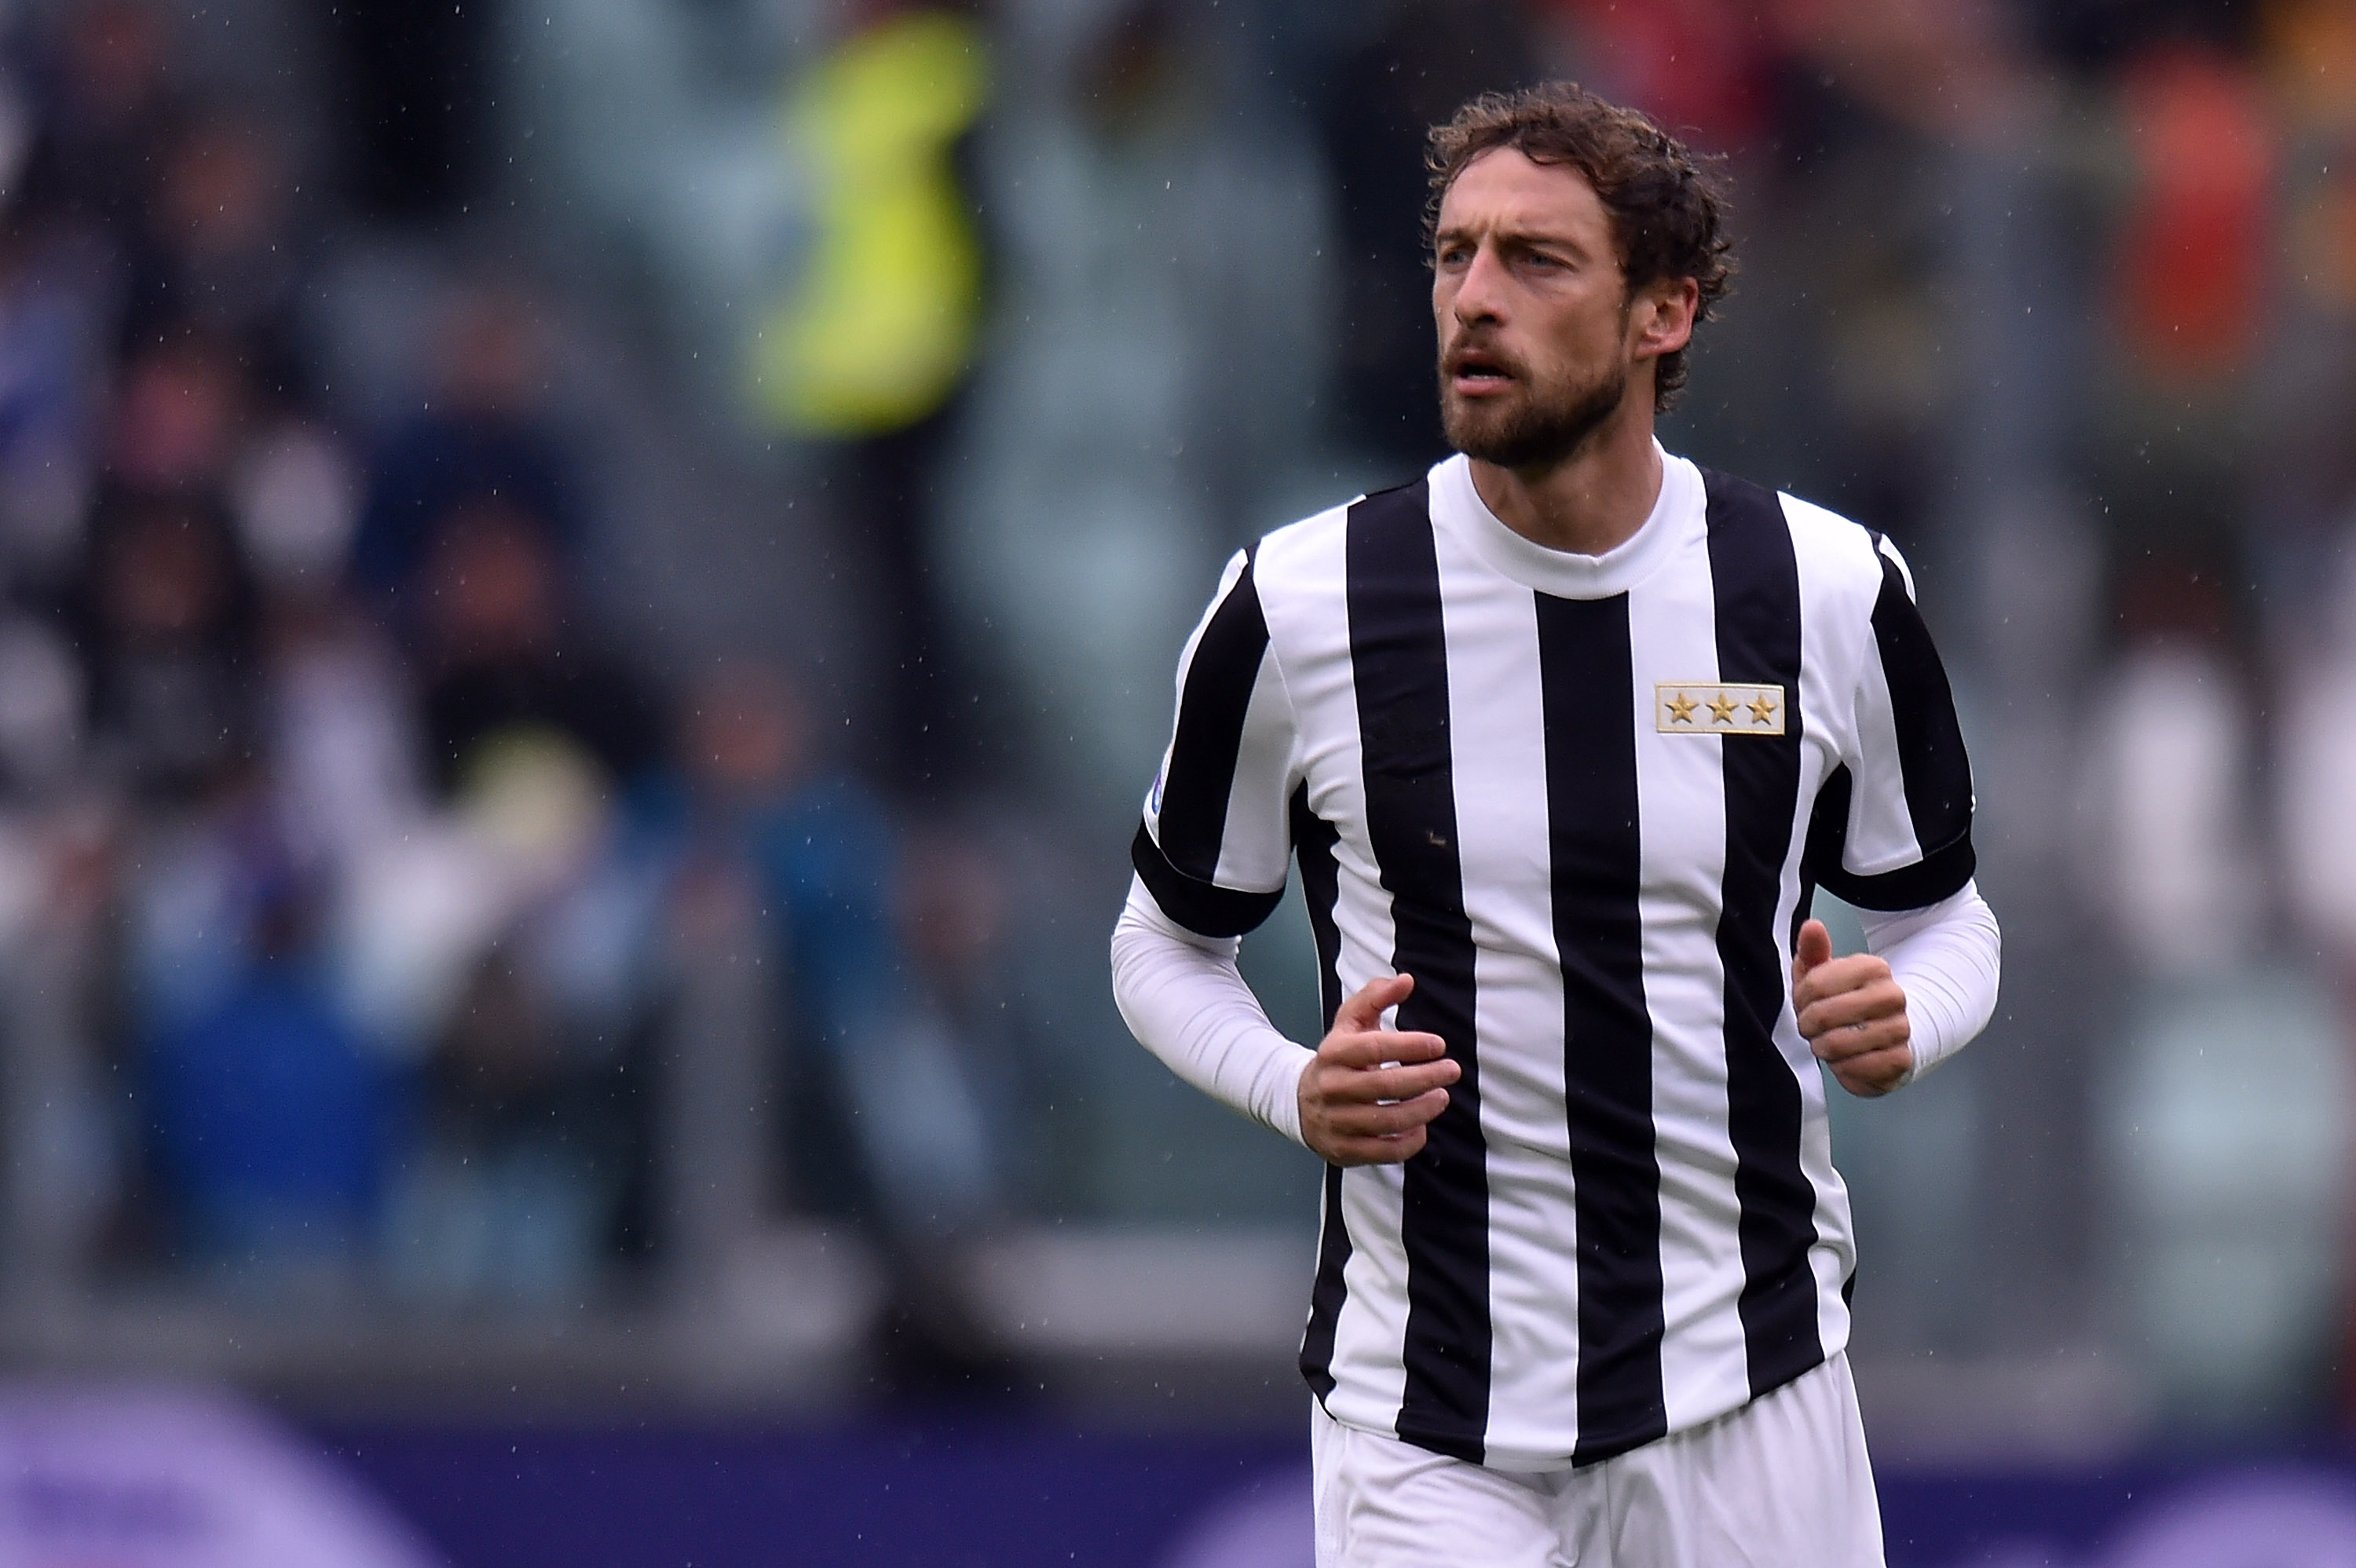 Marchisio: 'I'm happy to be playing again' -Juvefc.com